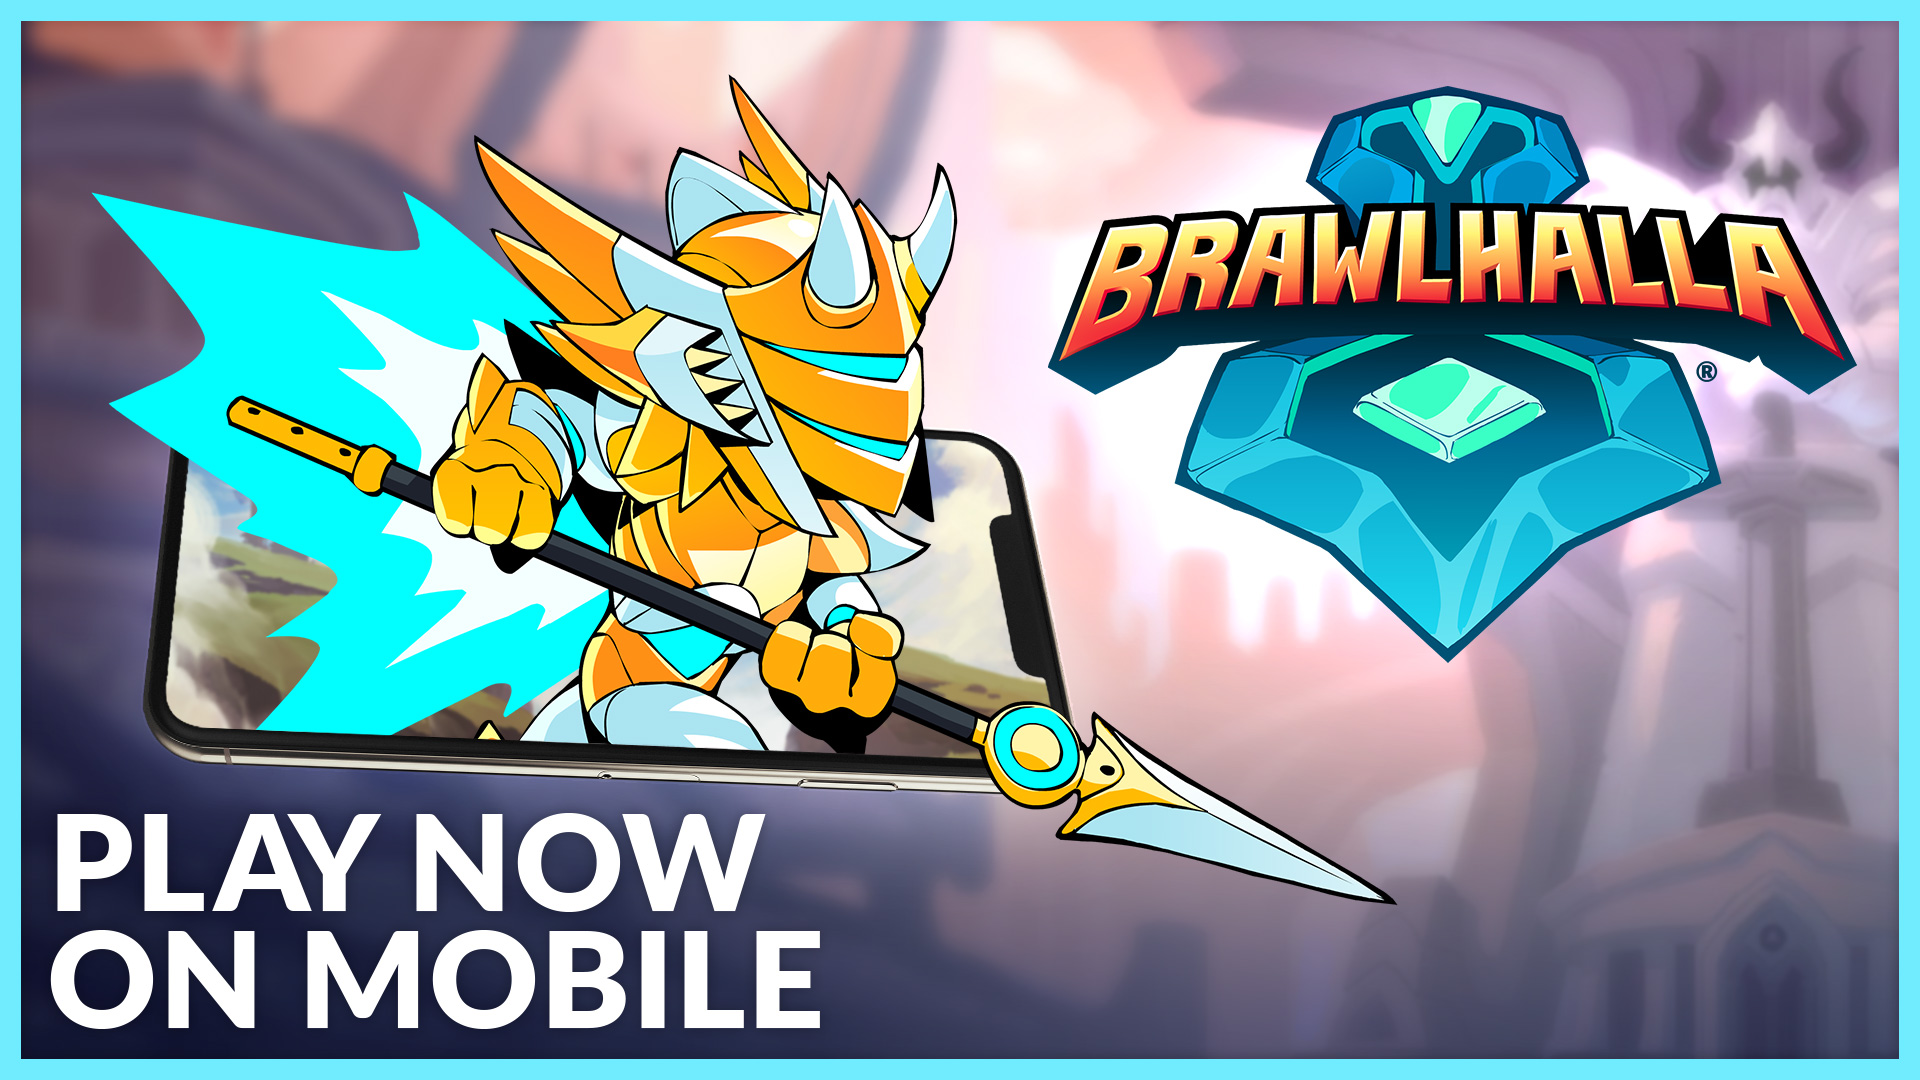 Free Skin to Celebrate Mobile Launch